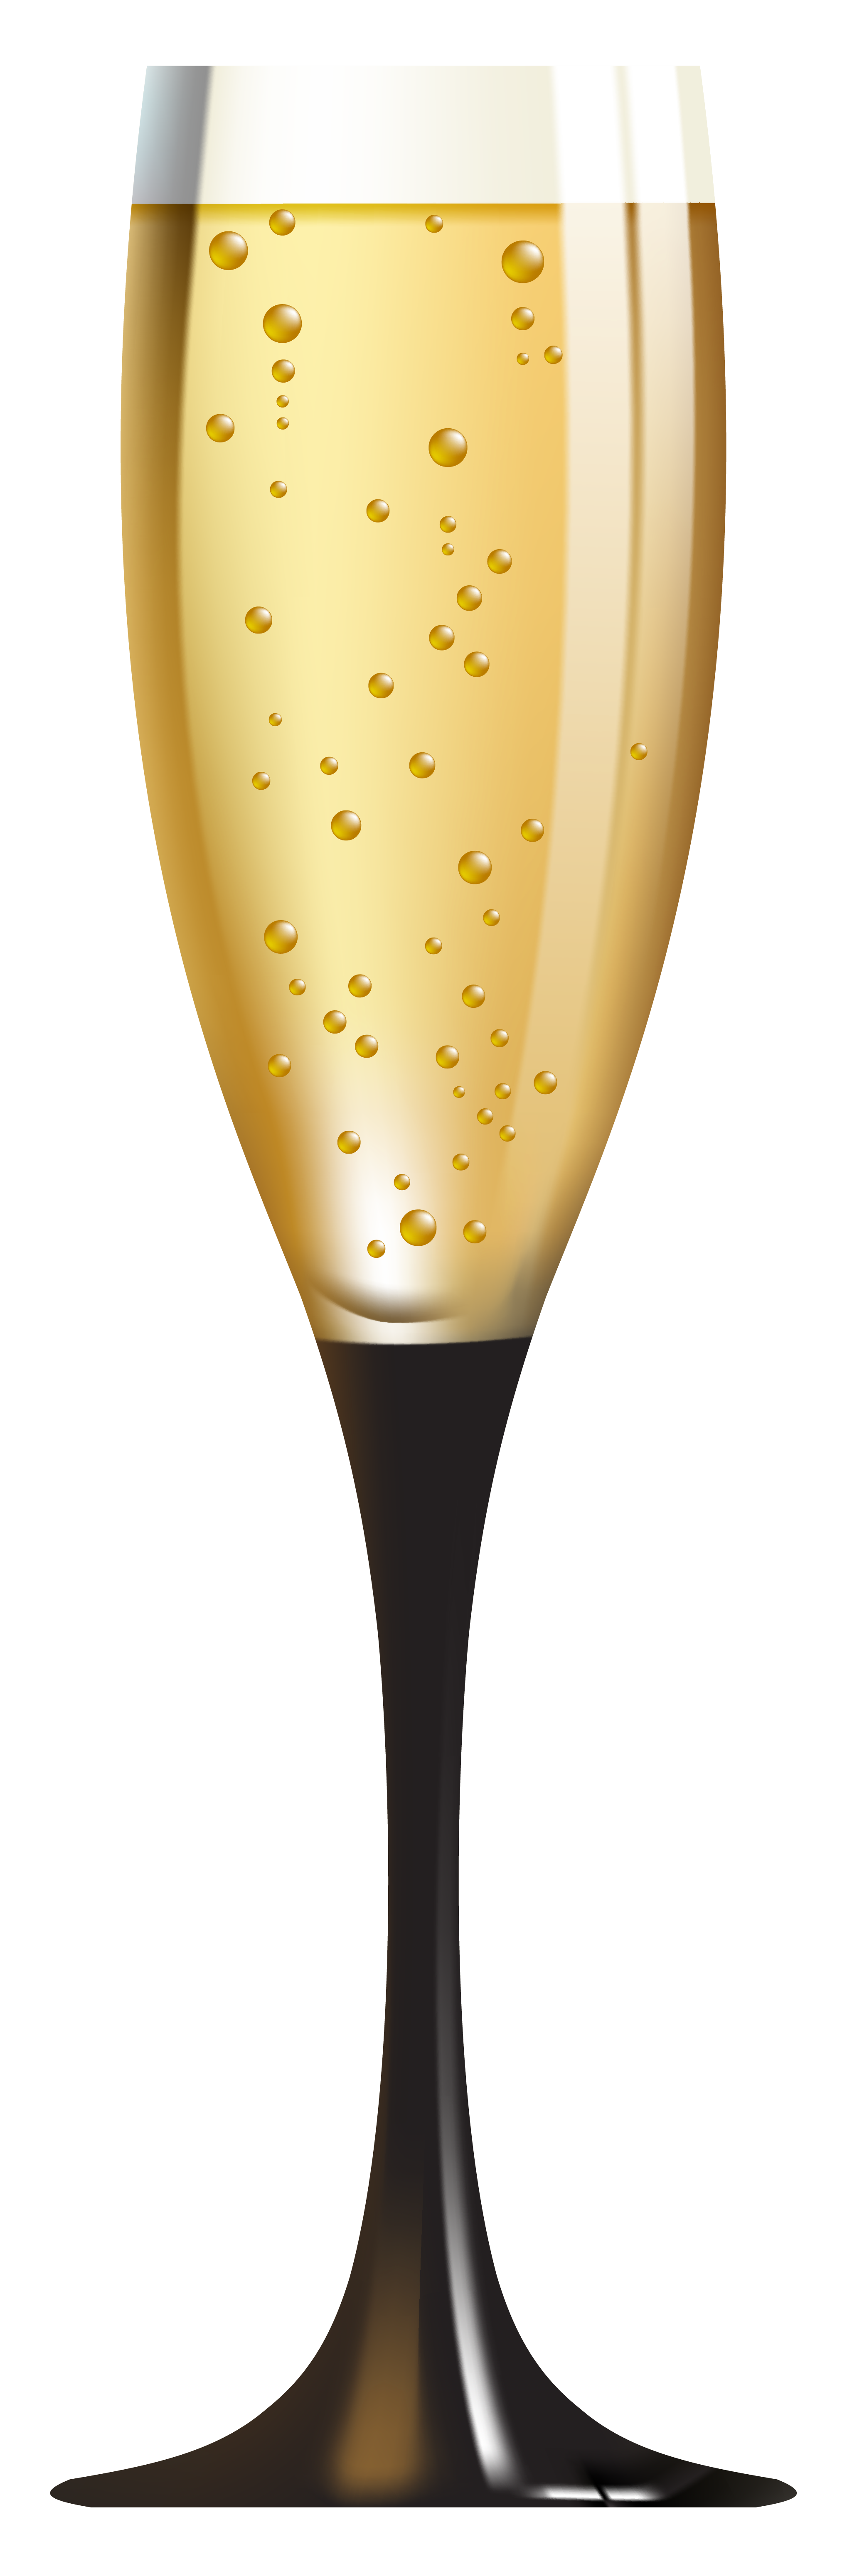 Png transparent images all. Champaign clipart champagne glass